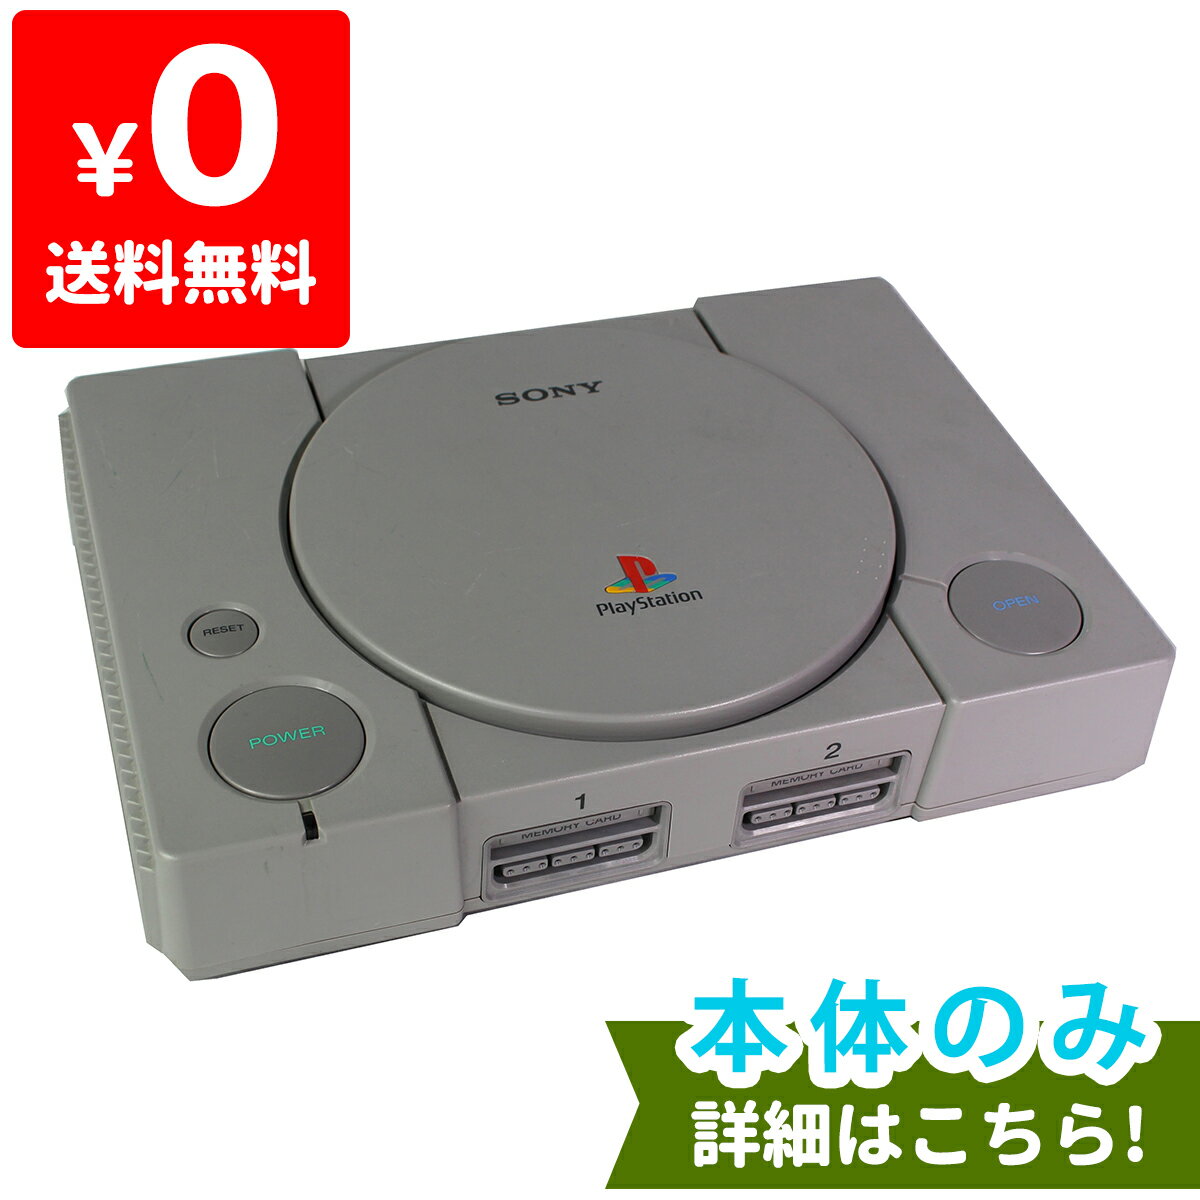 PS 7500 SCPH-7500 本体 のみ PlayStation SONY ソニー 【中古】 4948872075008